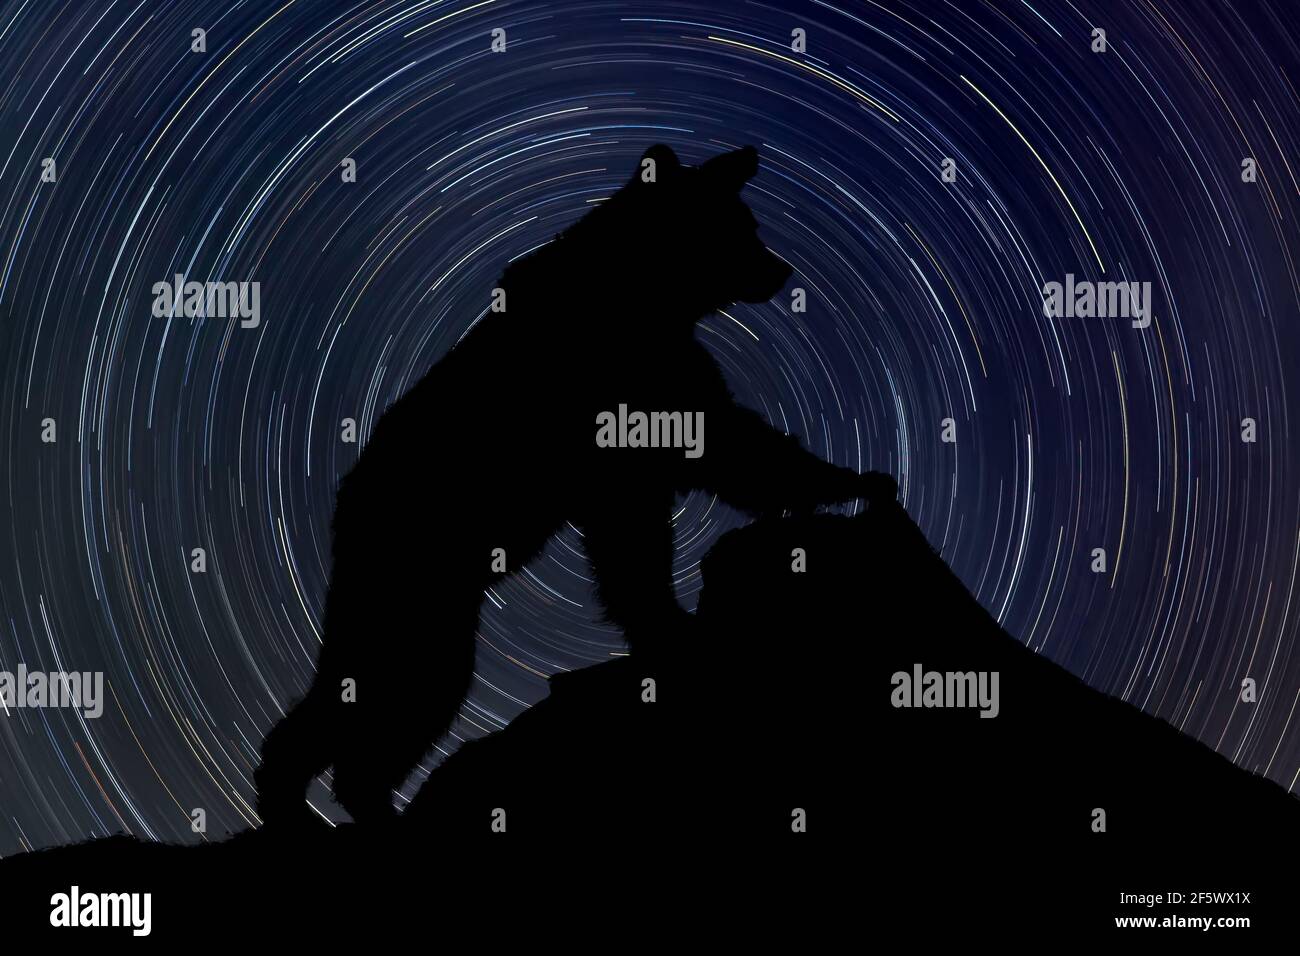 Silhouette of bear on rock at night with startrail in the background Stock Photo